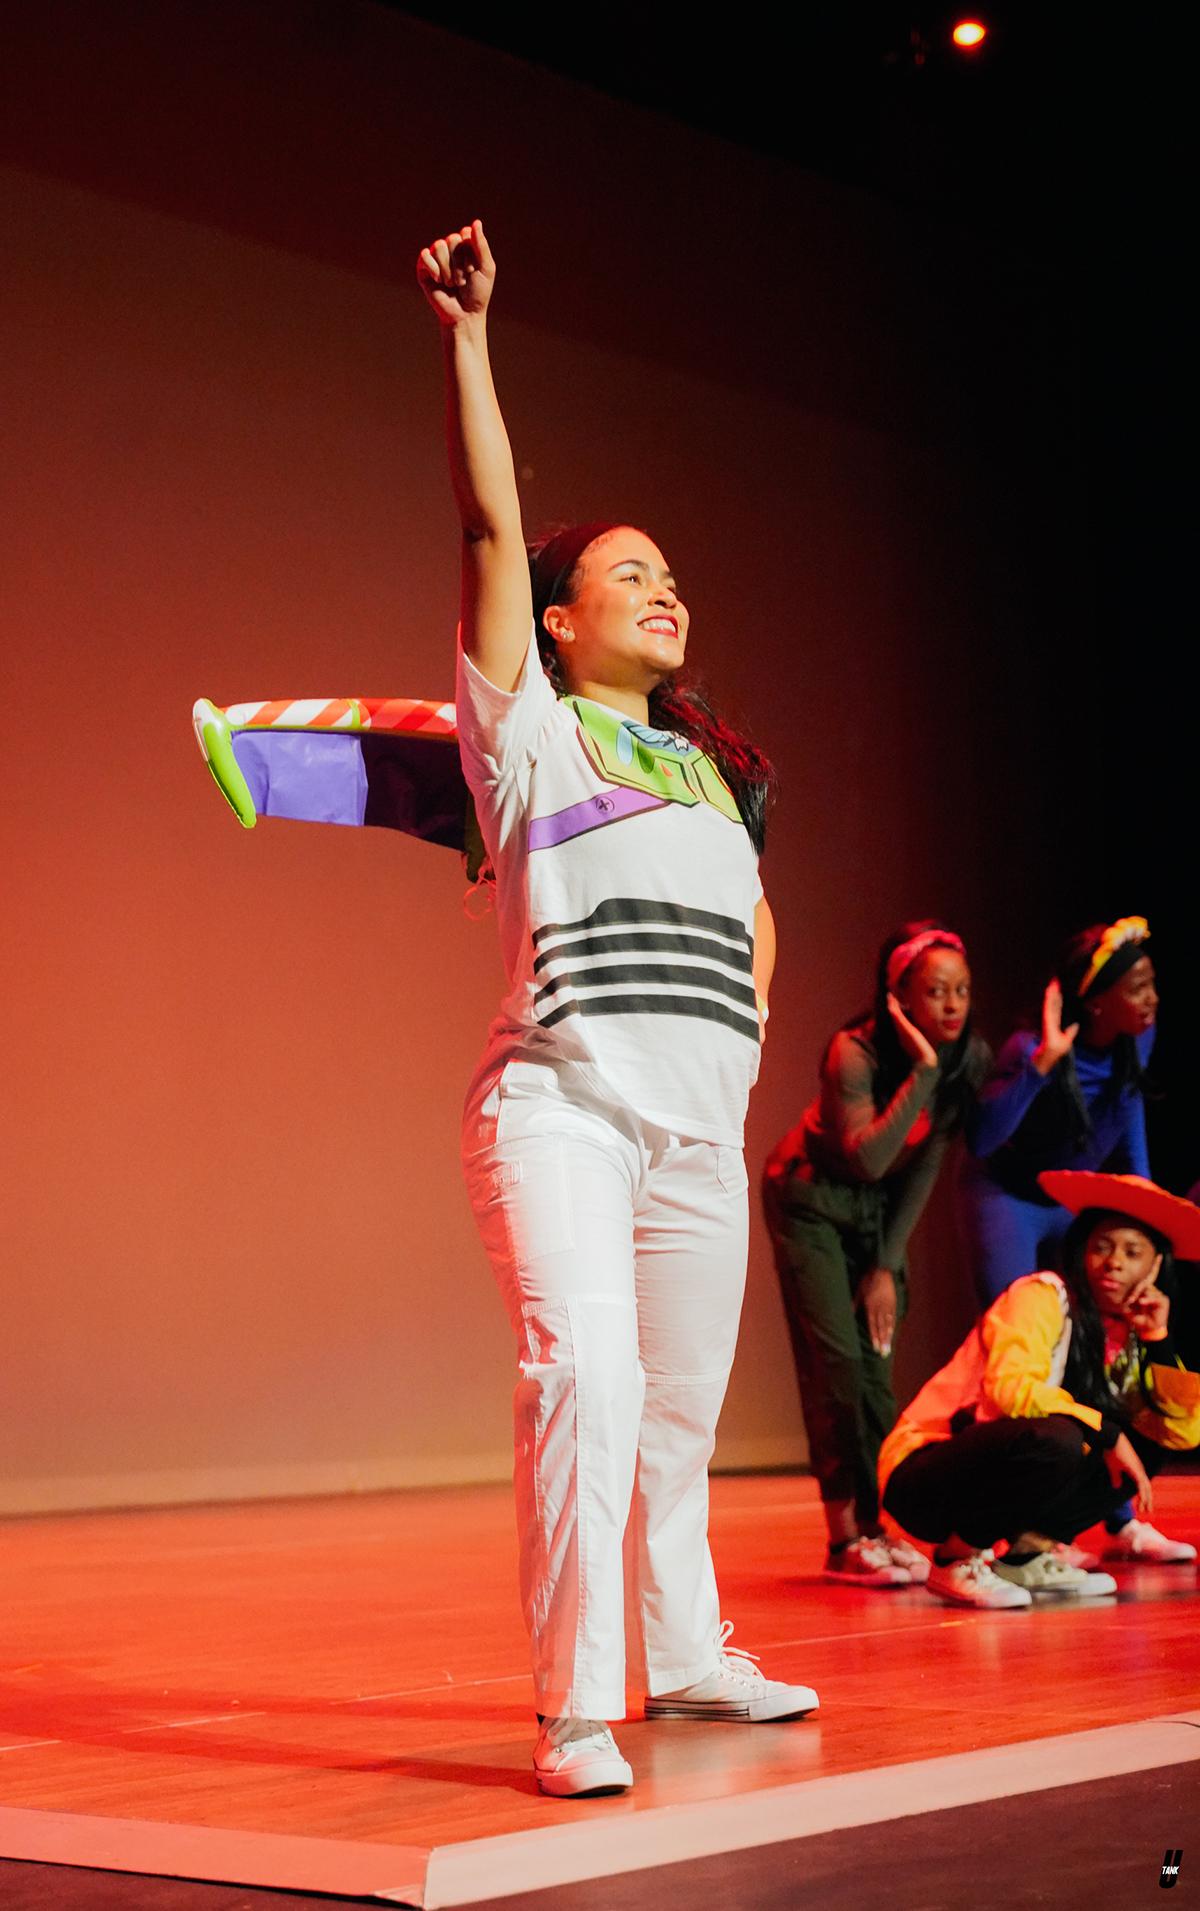 Sydney Mudd on stage dressed in a Buzz Lightyear costume with her arm extended in the air during the NPHC Step Show in Fall 2022.